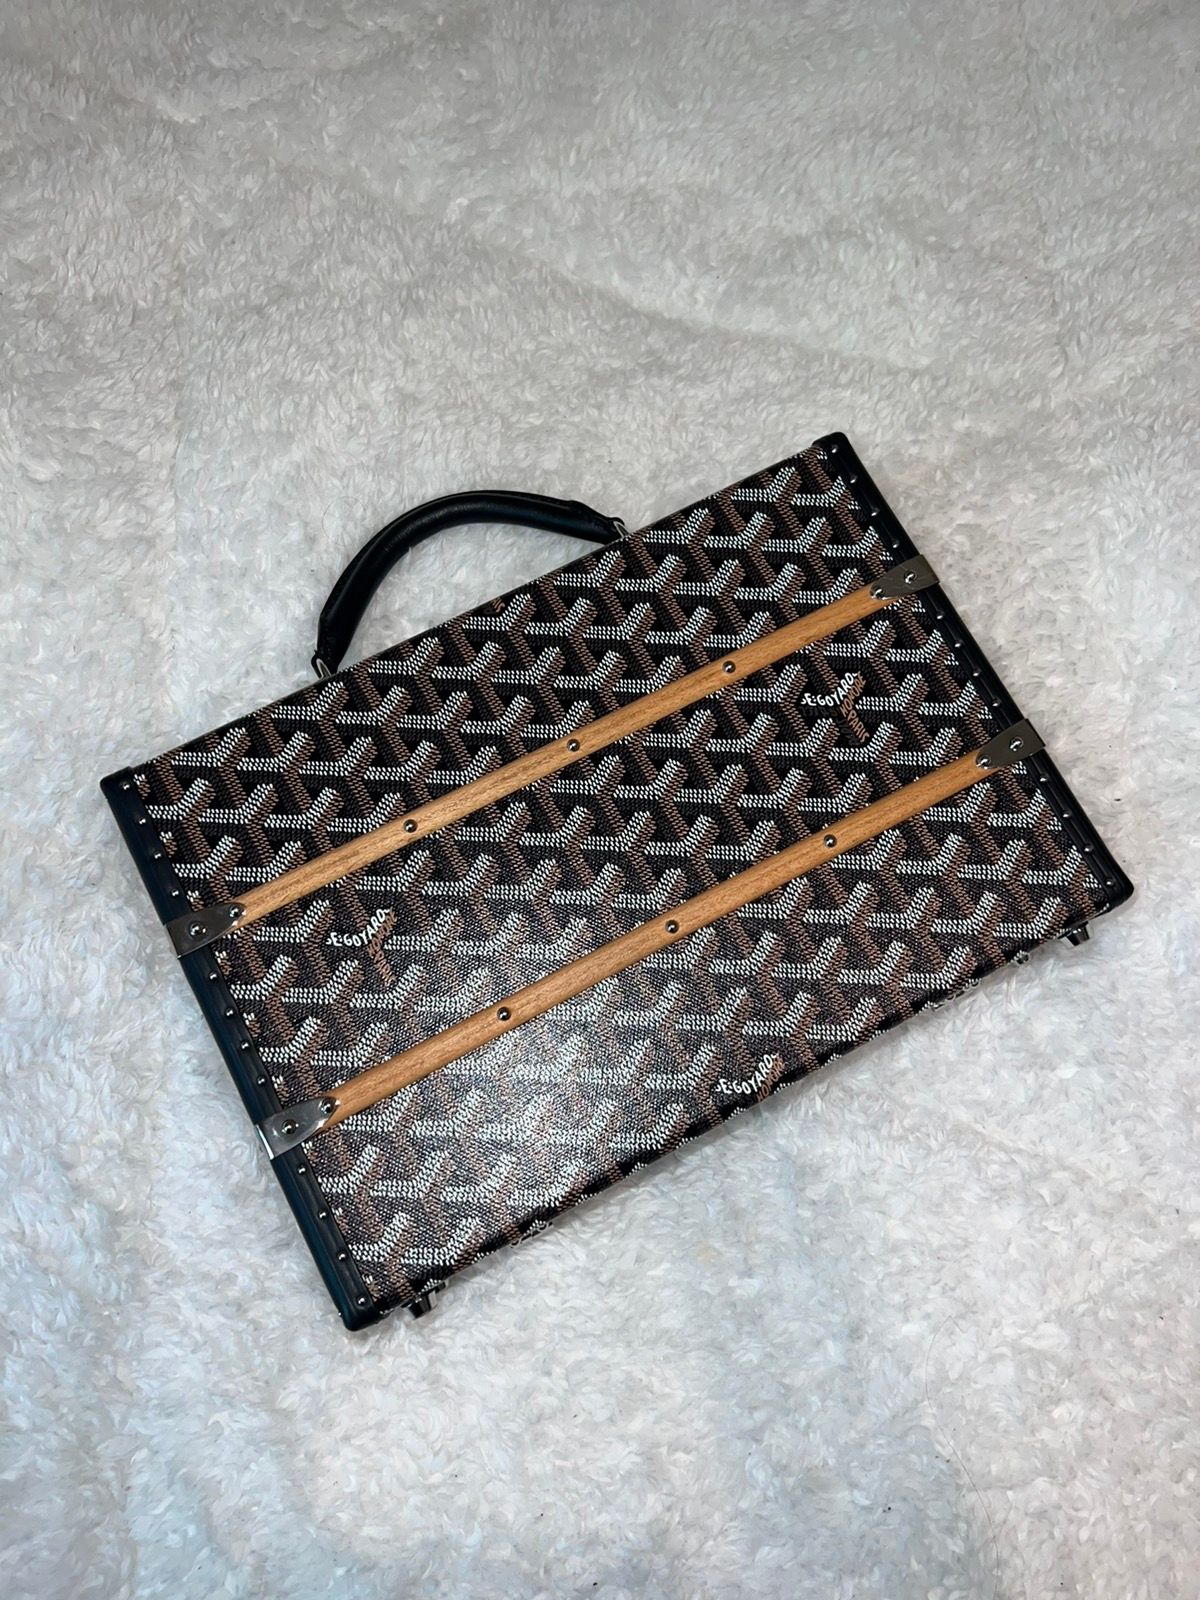 Goyard palace 50 Trunk- rare find classic and iconic style